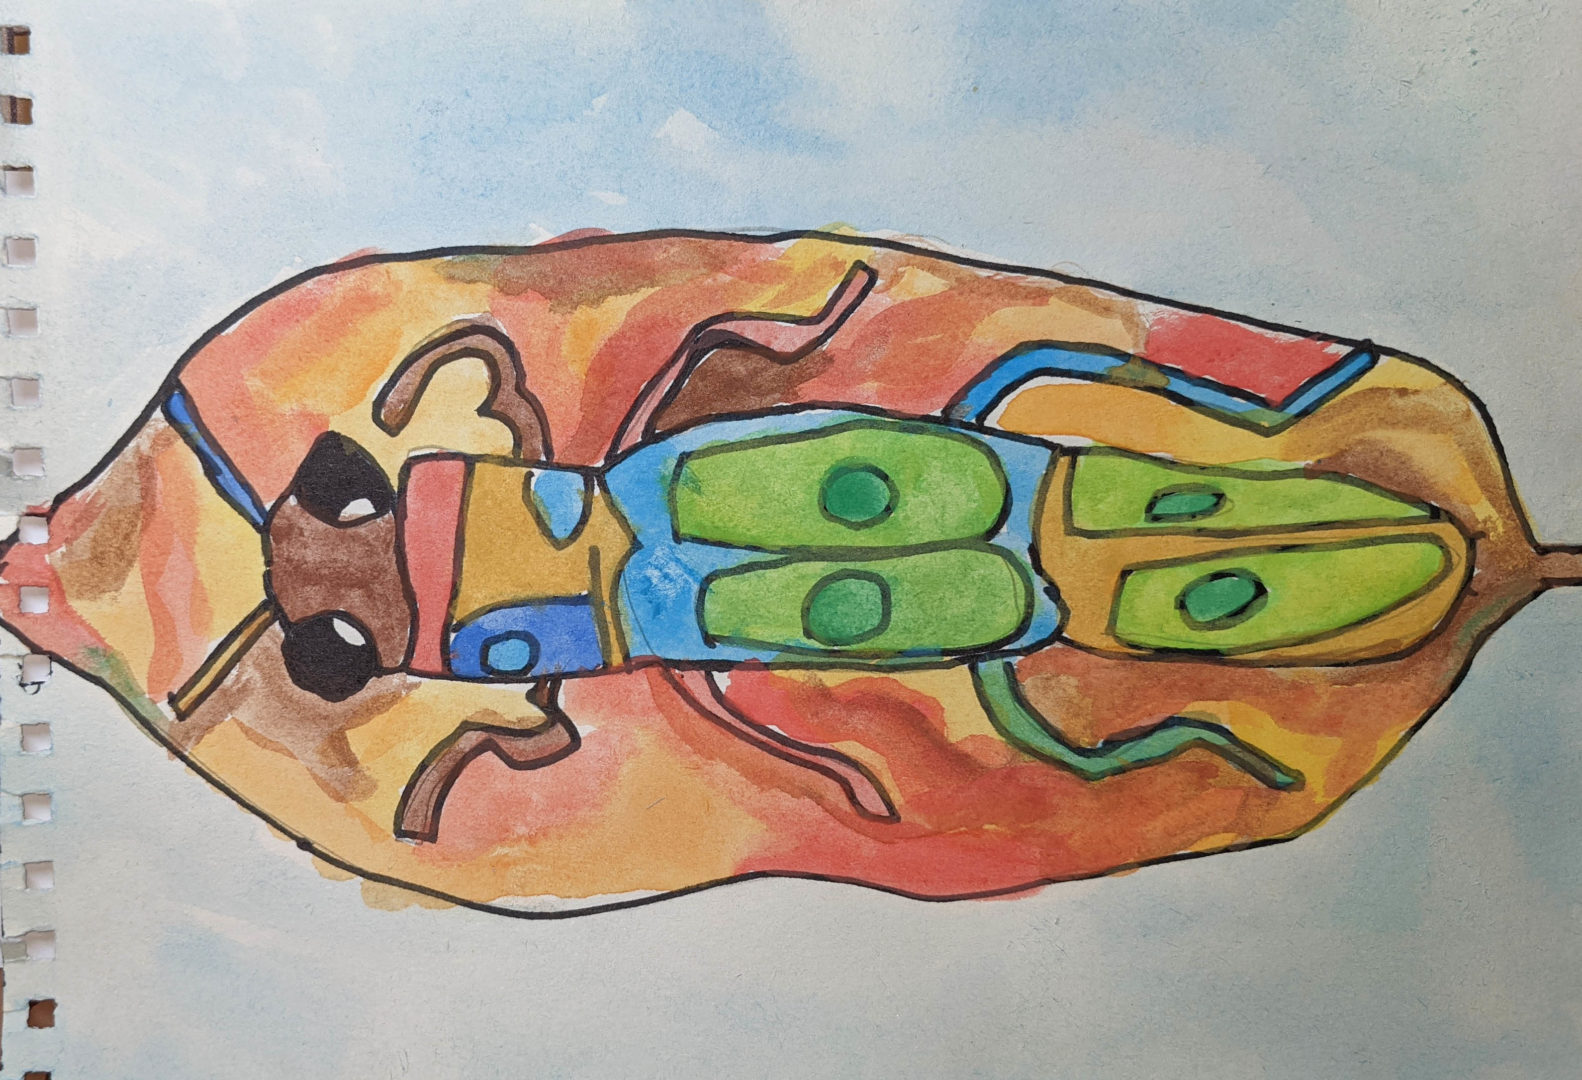 2021 children's art competition, a very colourful watercolour painting of an insect